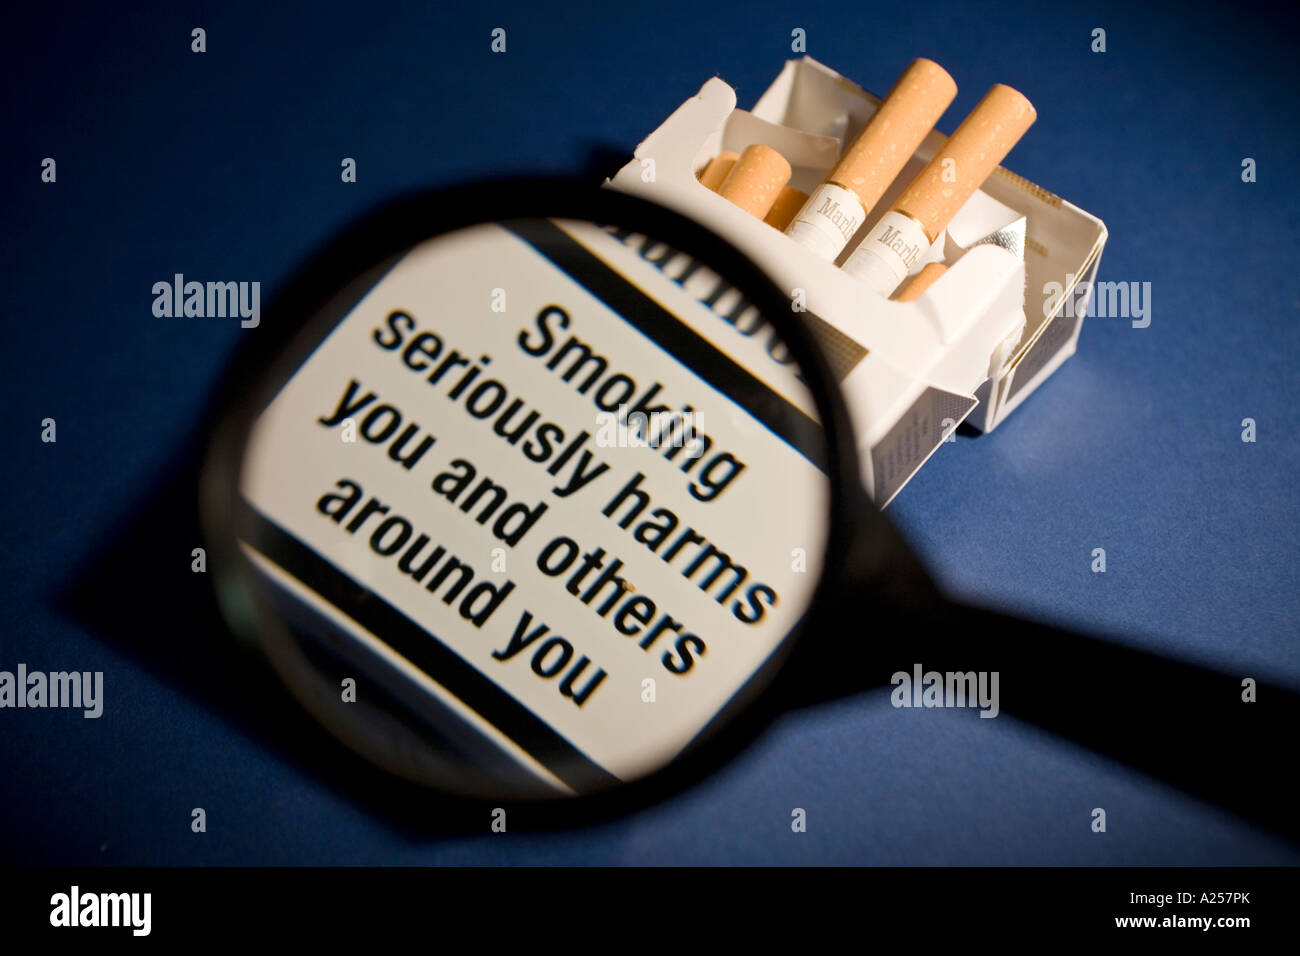 Health warning on packet of cigarettes viewed through a magnifying glass Stock Photo